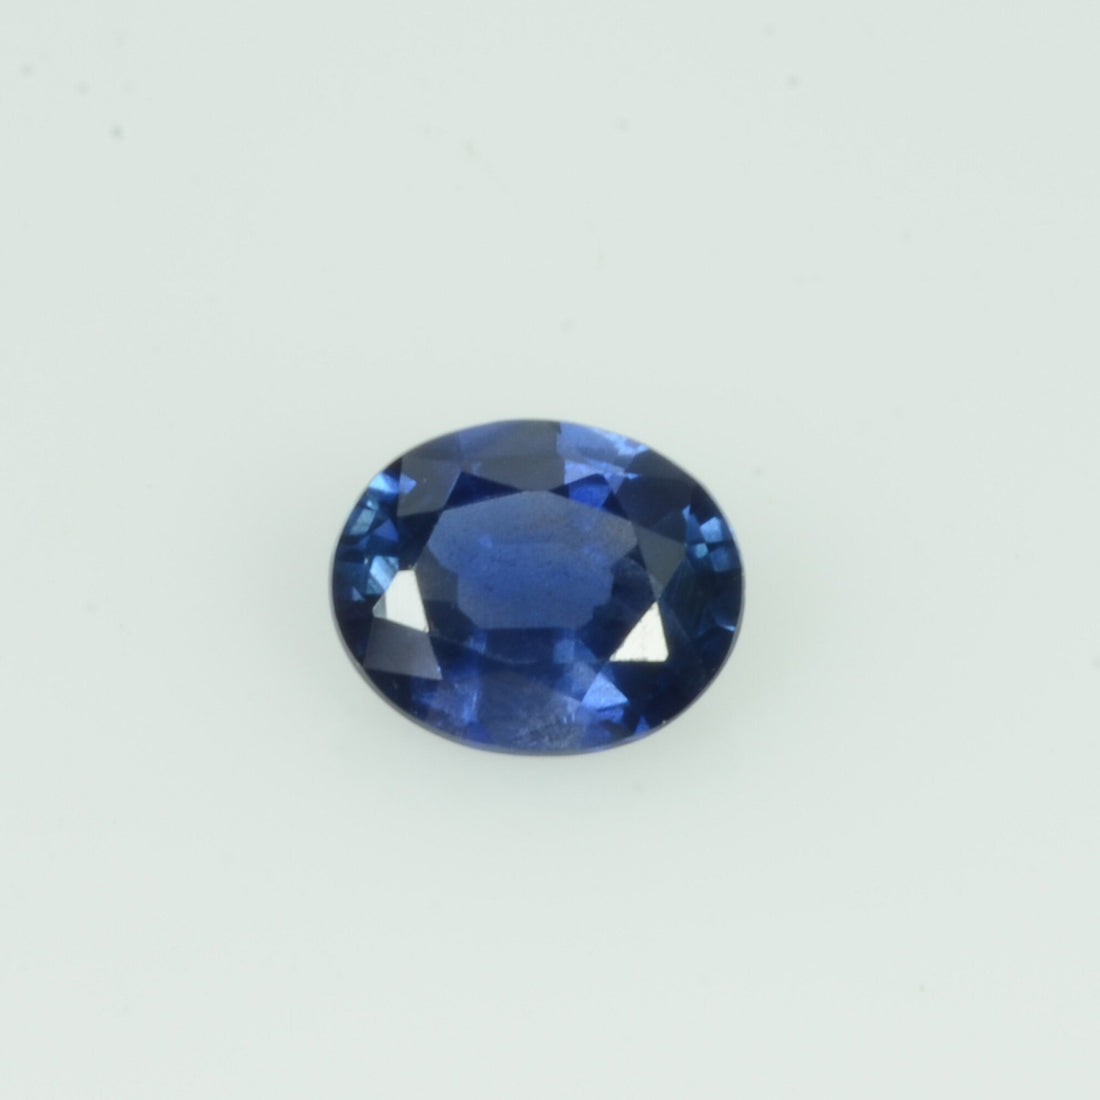 0.36 cts Natural Blue Sapphire Loose Gemstone Oval cut